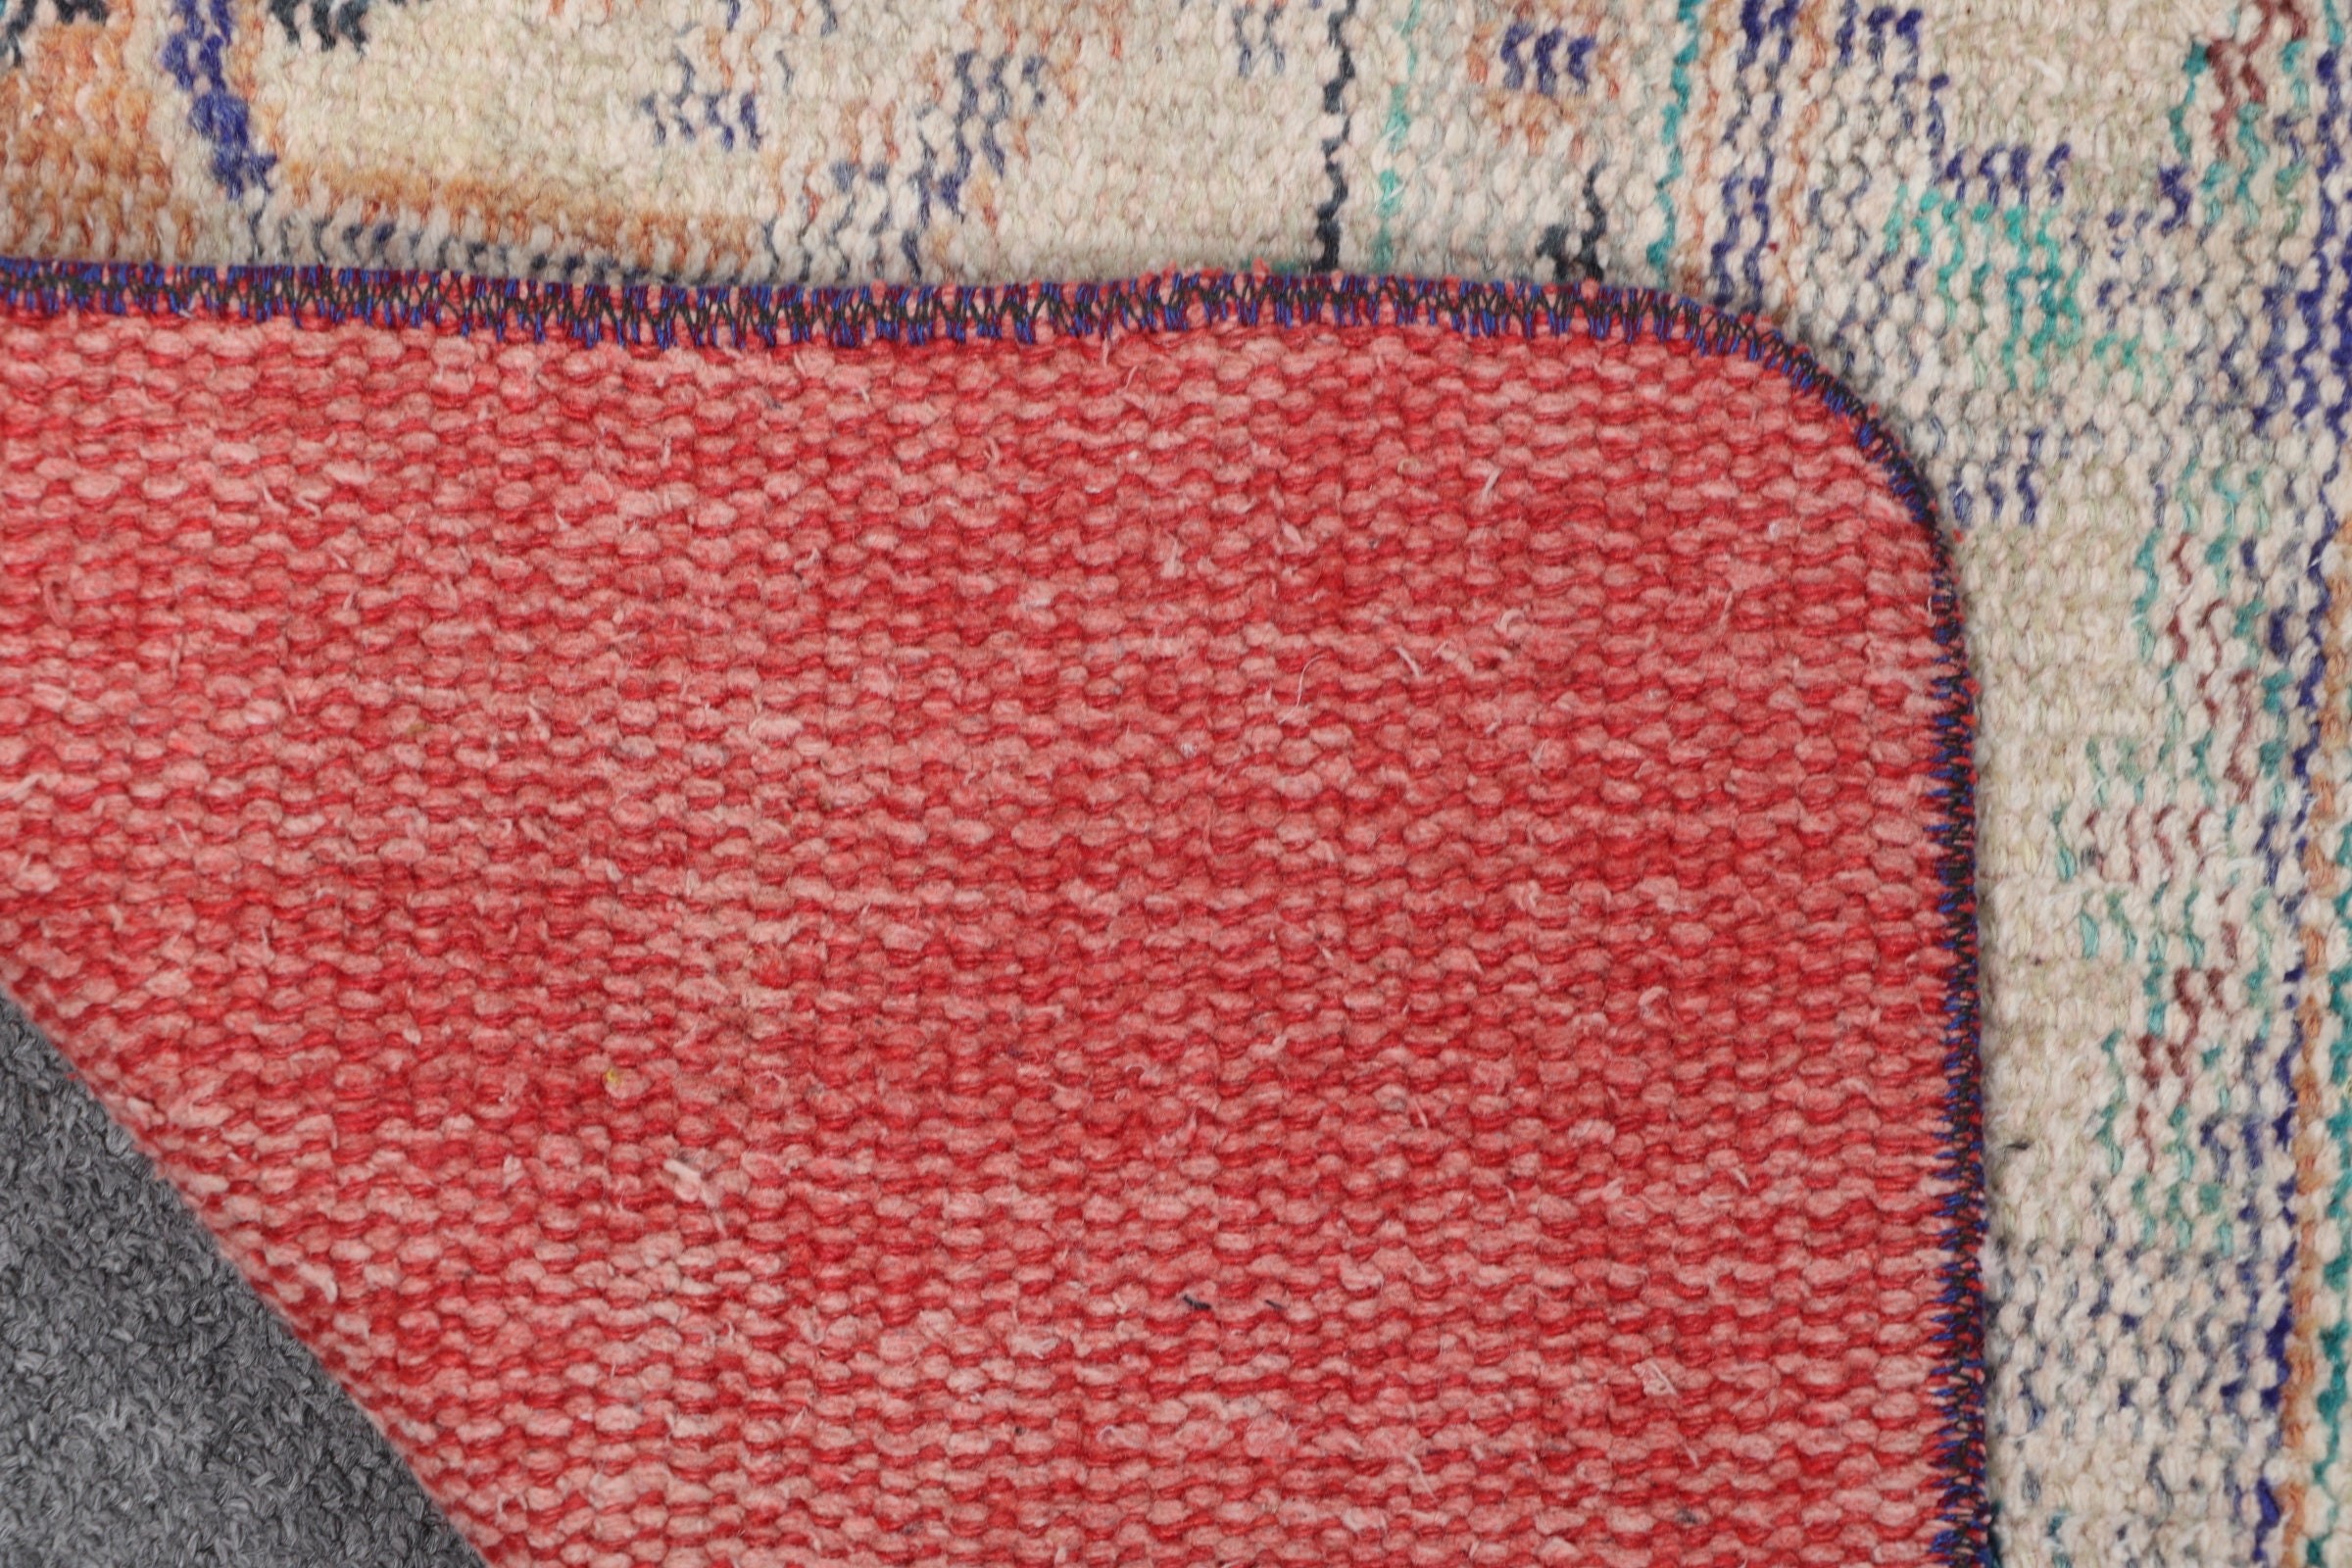 Entry Rugs, Cool Rug, Vintage Rugs, Bath Mat Cute Rug, Red Moroccan Rug, Turkish Rugs, 1.4x3.8 ft Small Rug, Wall Hanging Rug